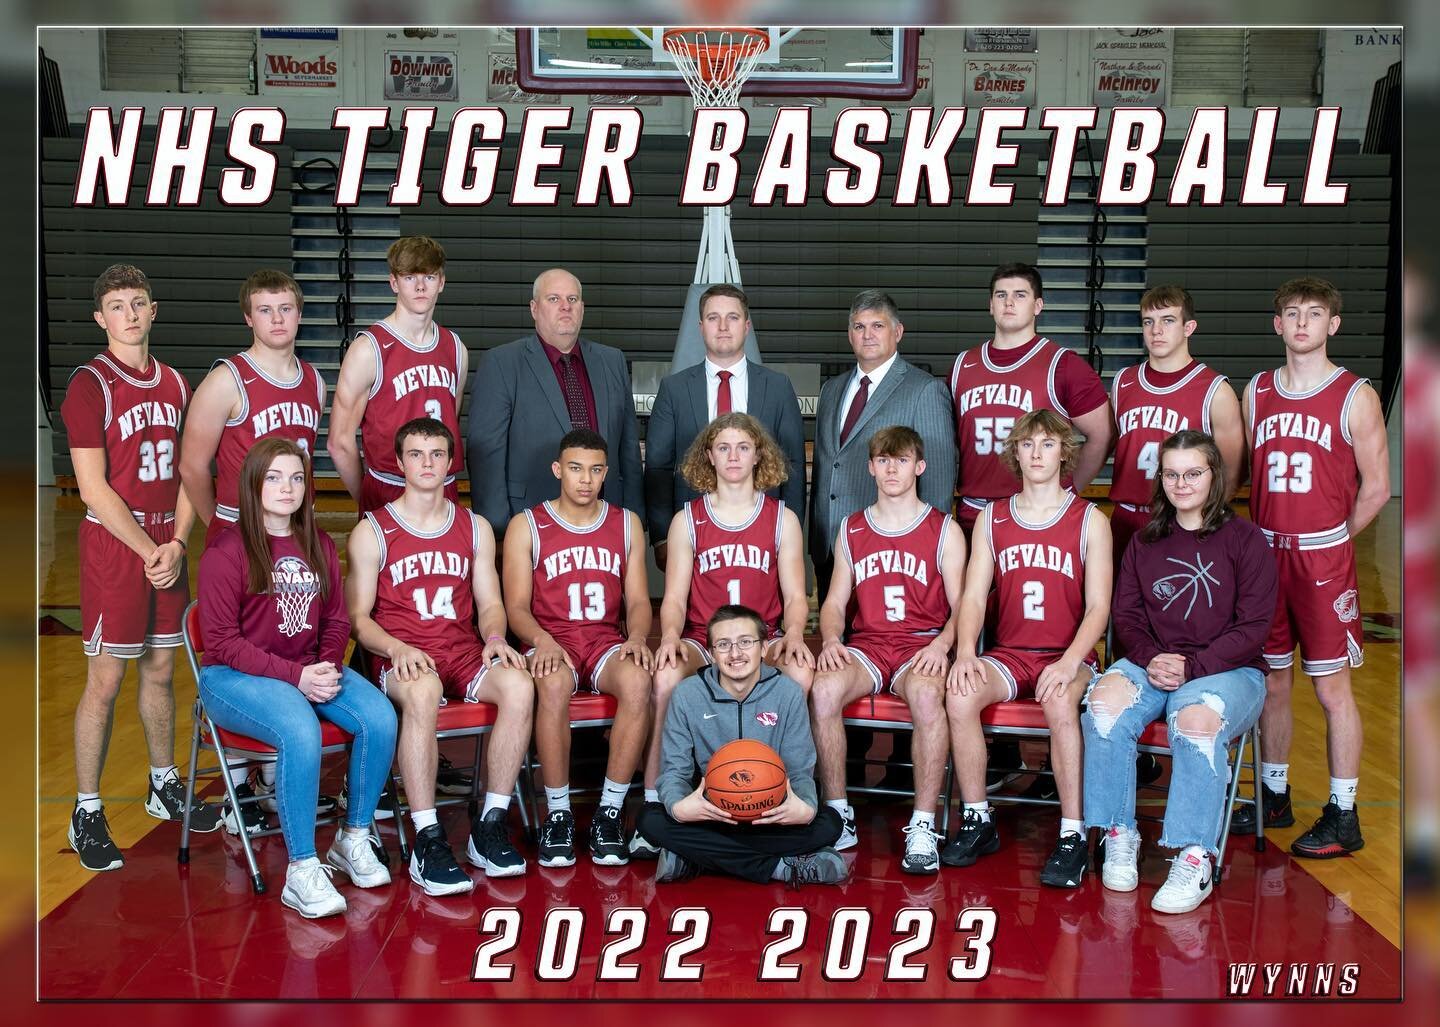 Good luck to our NHS Tigers as they take on Clinton in the Class 4 District 13 Boys Basketball Tournament at Pleasant Hill! Go Tigers! 🏀🏀🏀